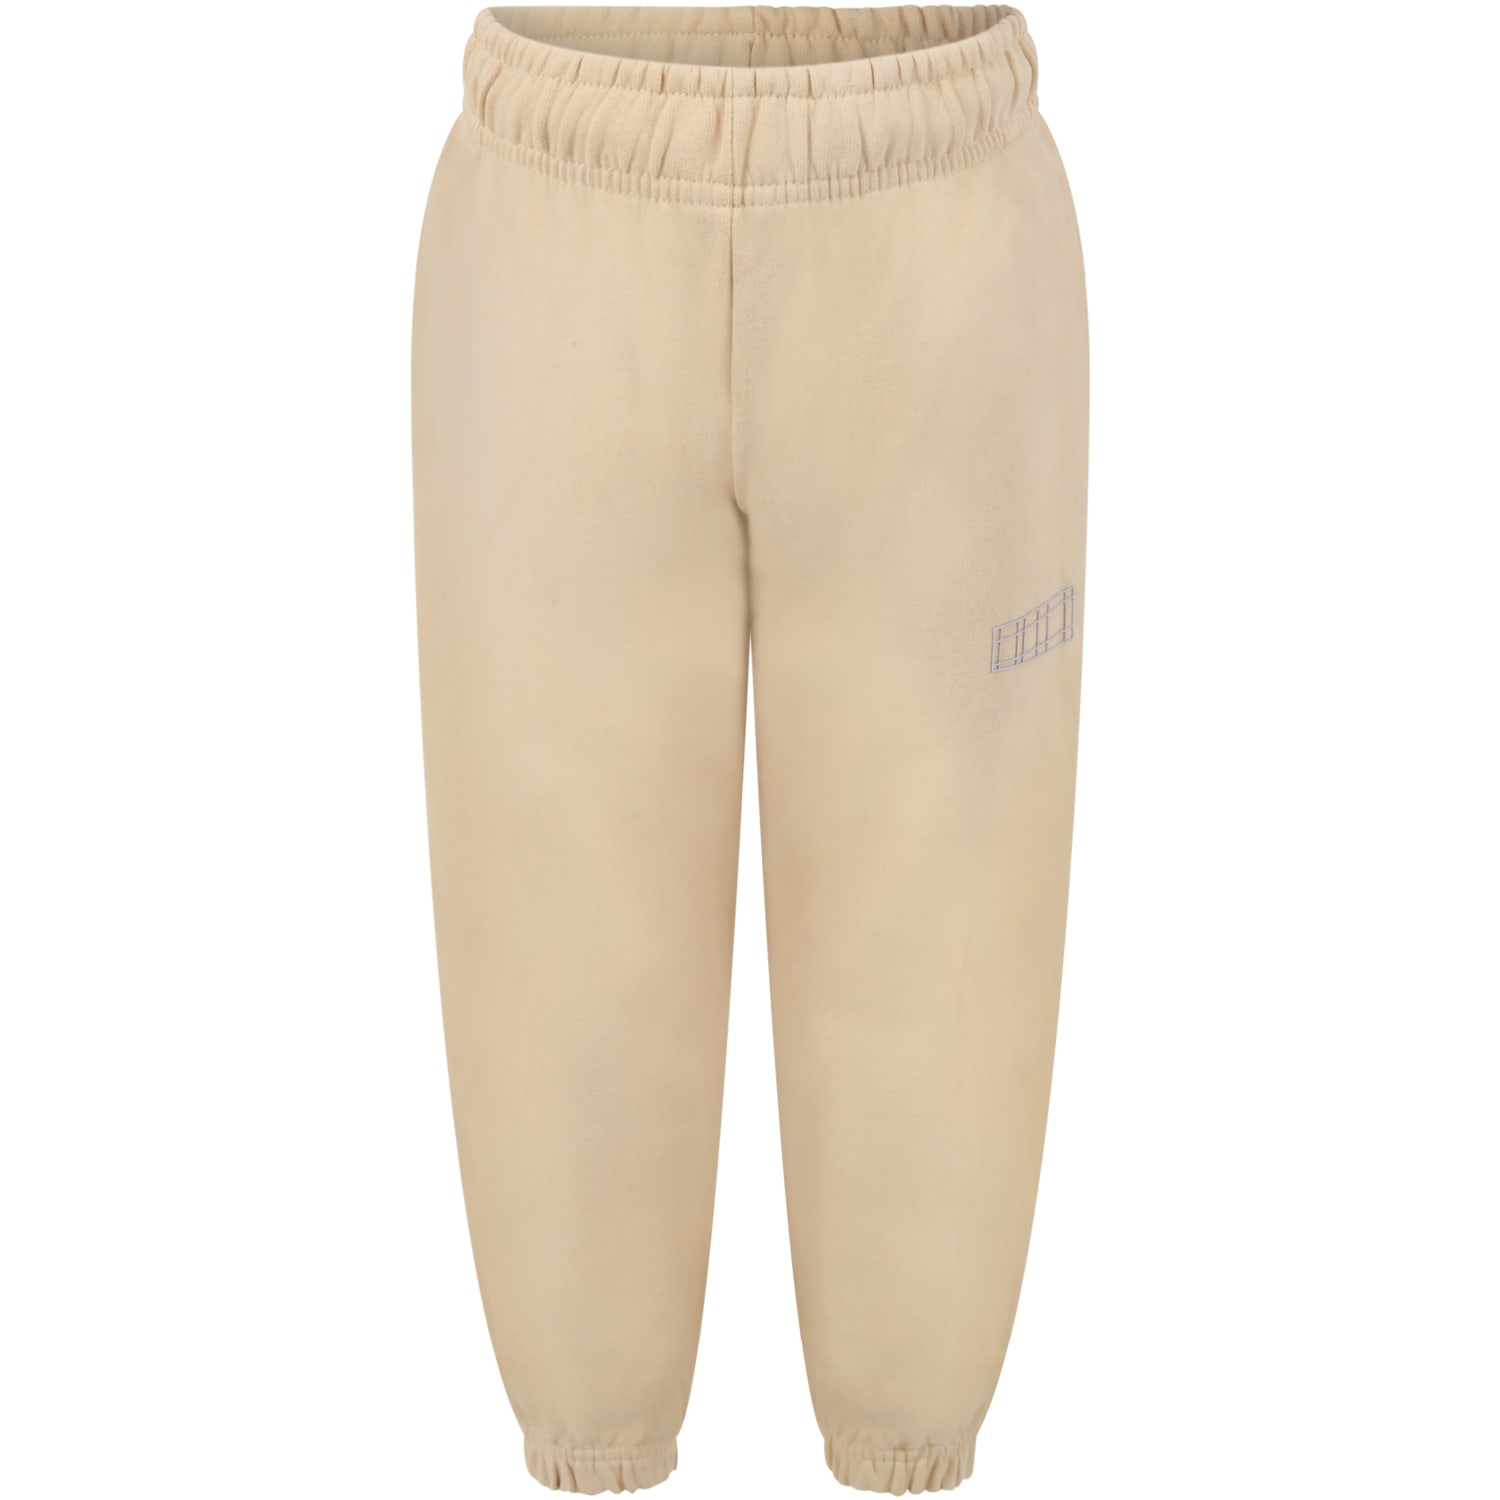 Molo Beige Sweatpants For Kids With Iconic Print